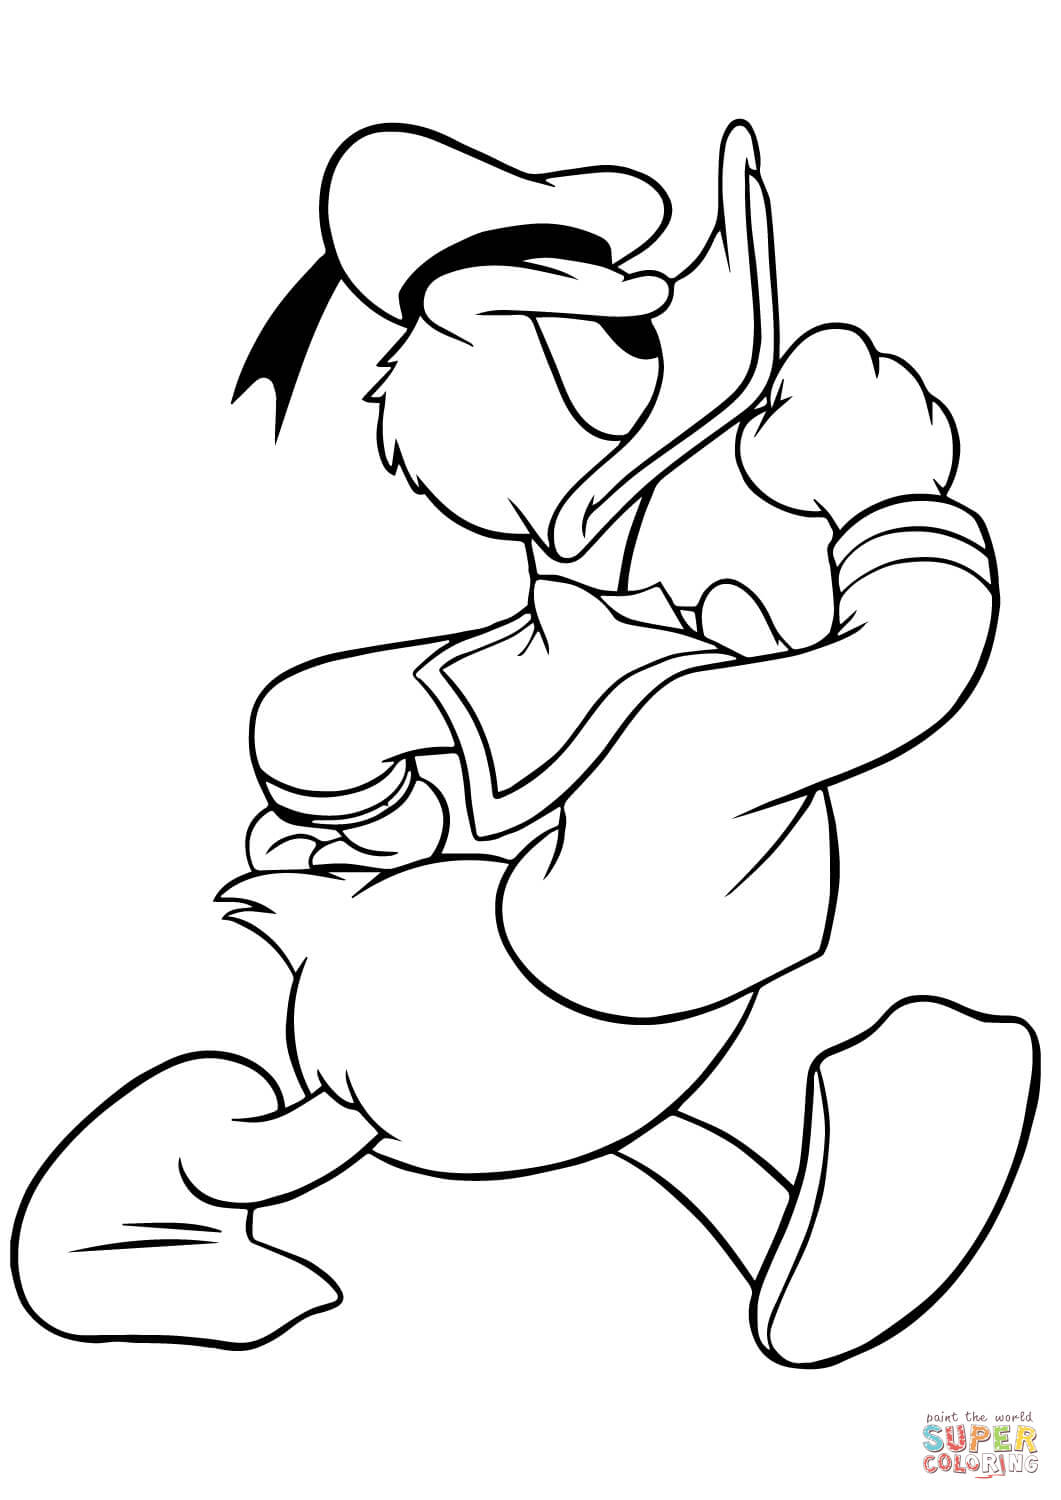 Donald duck is looking for someone coloring page free printable coloring pages